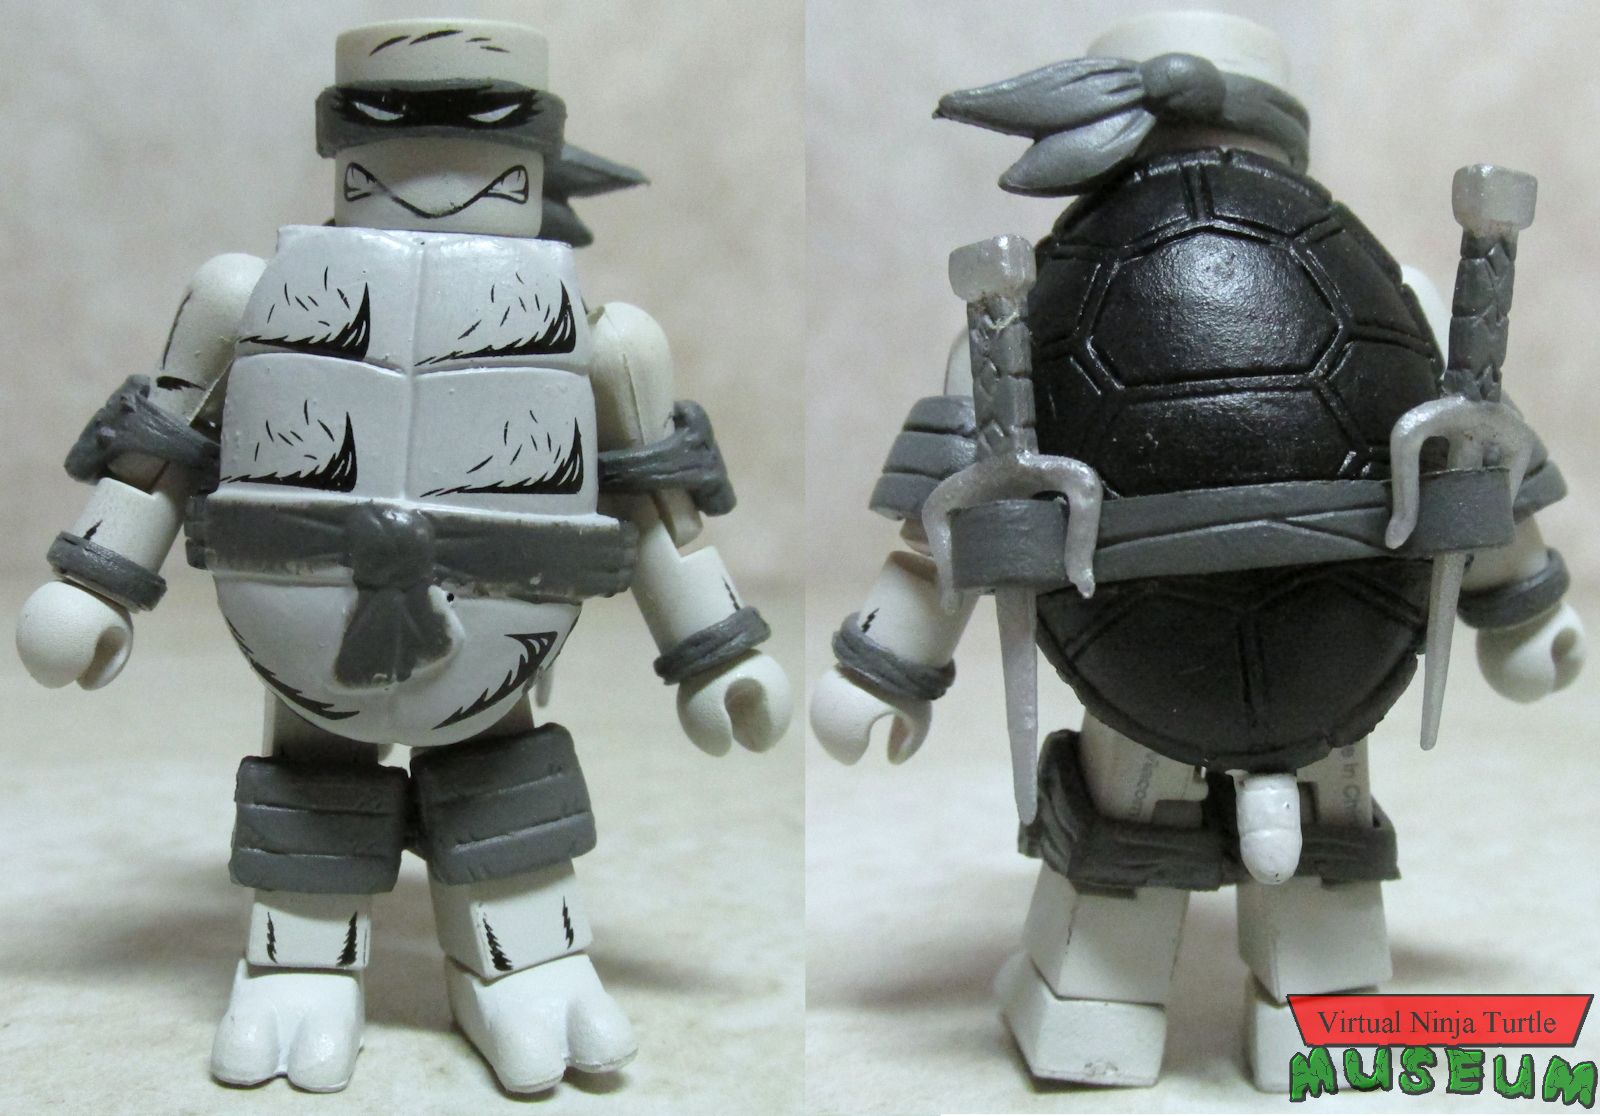 B&W Raphael front and back